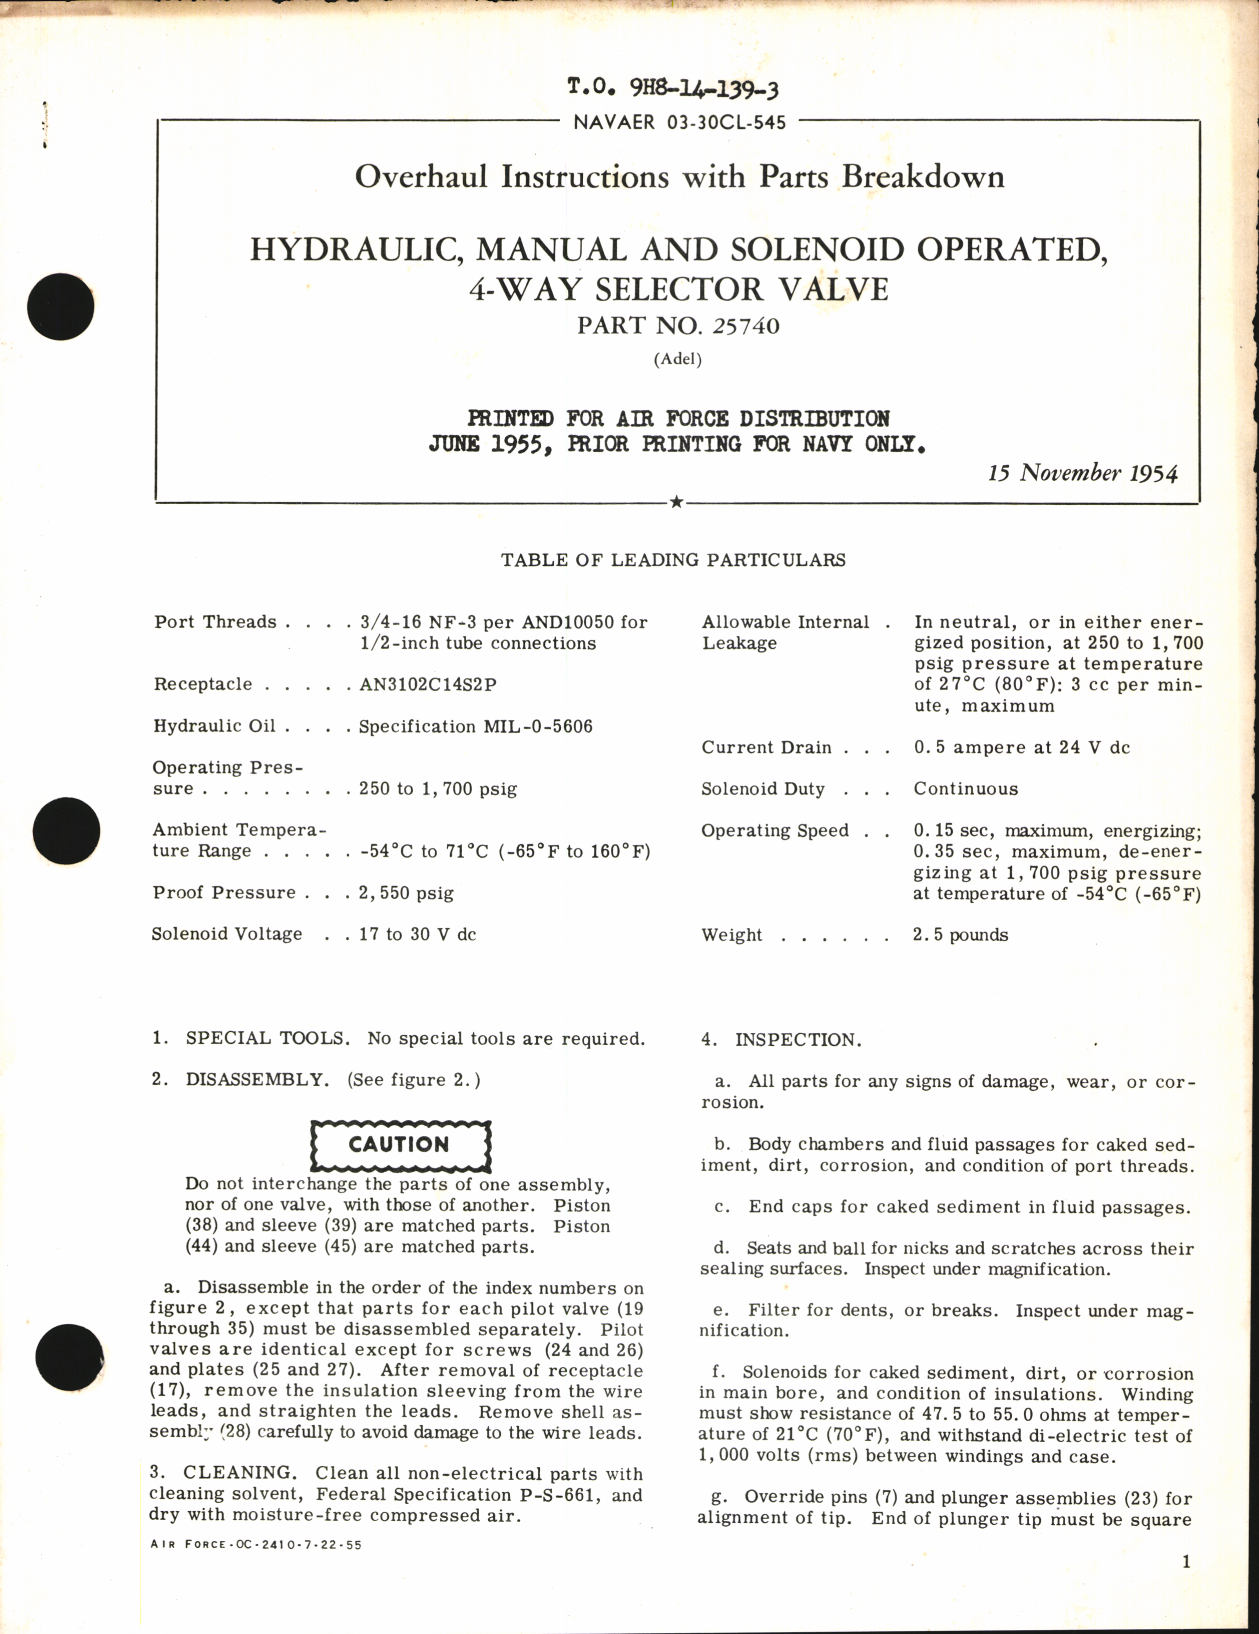 Sample page 1 from AirCorps Library document: Overhaul Instructions with Parts Breakdown for Hydraulic, Manual and Solenoid Operated, 4-Way Selector Valve, Part No. 25740 